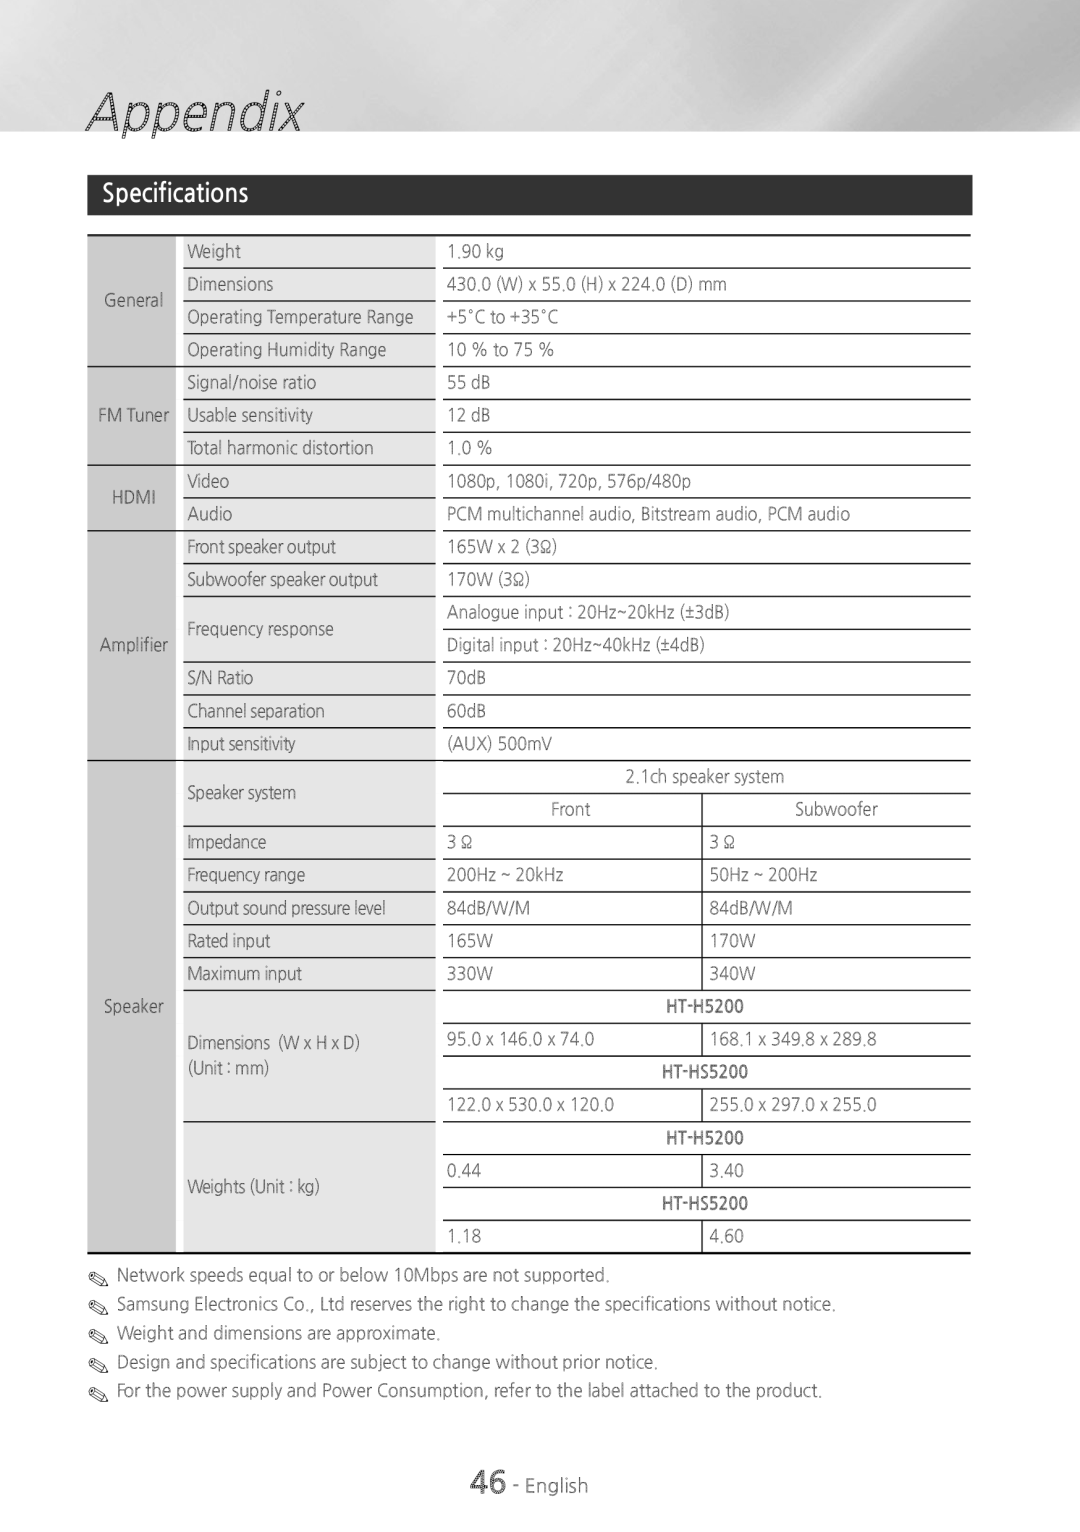 Samsung HT-H5200, HT-HS5200 user manual Specifications, Appendix, English 